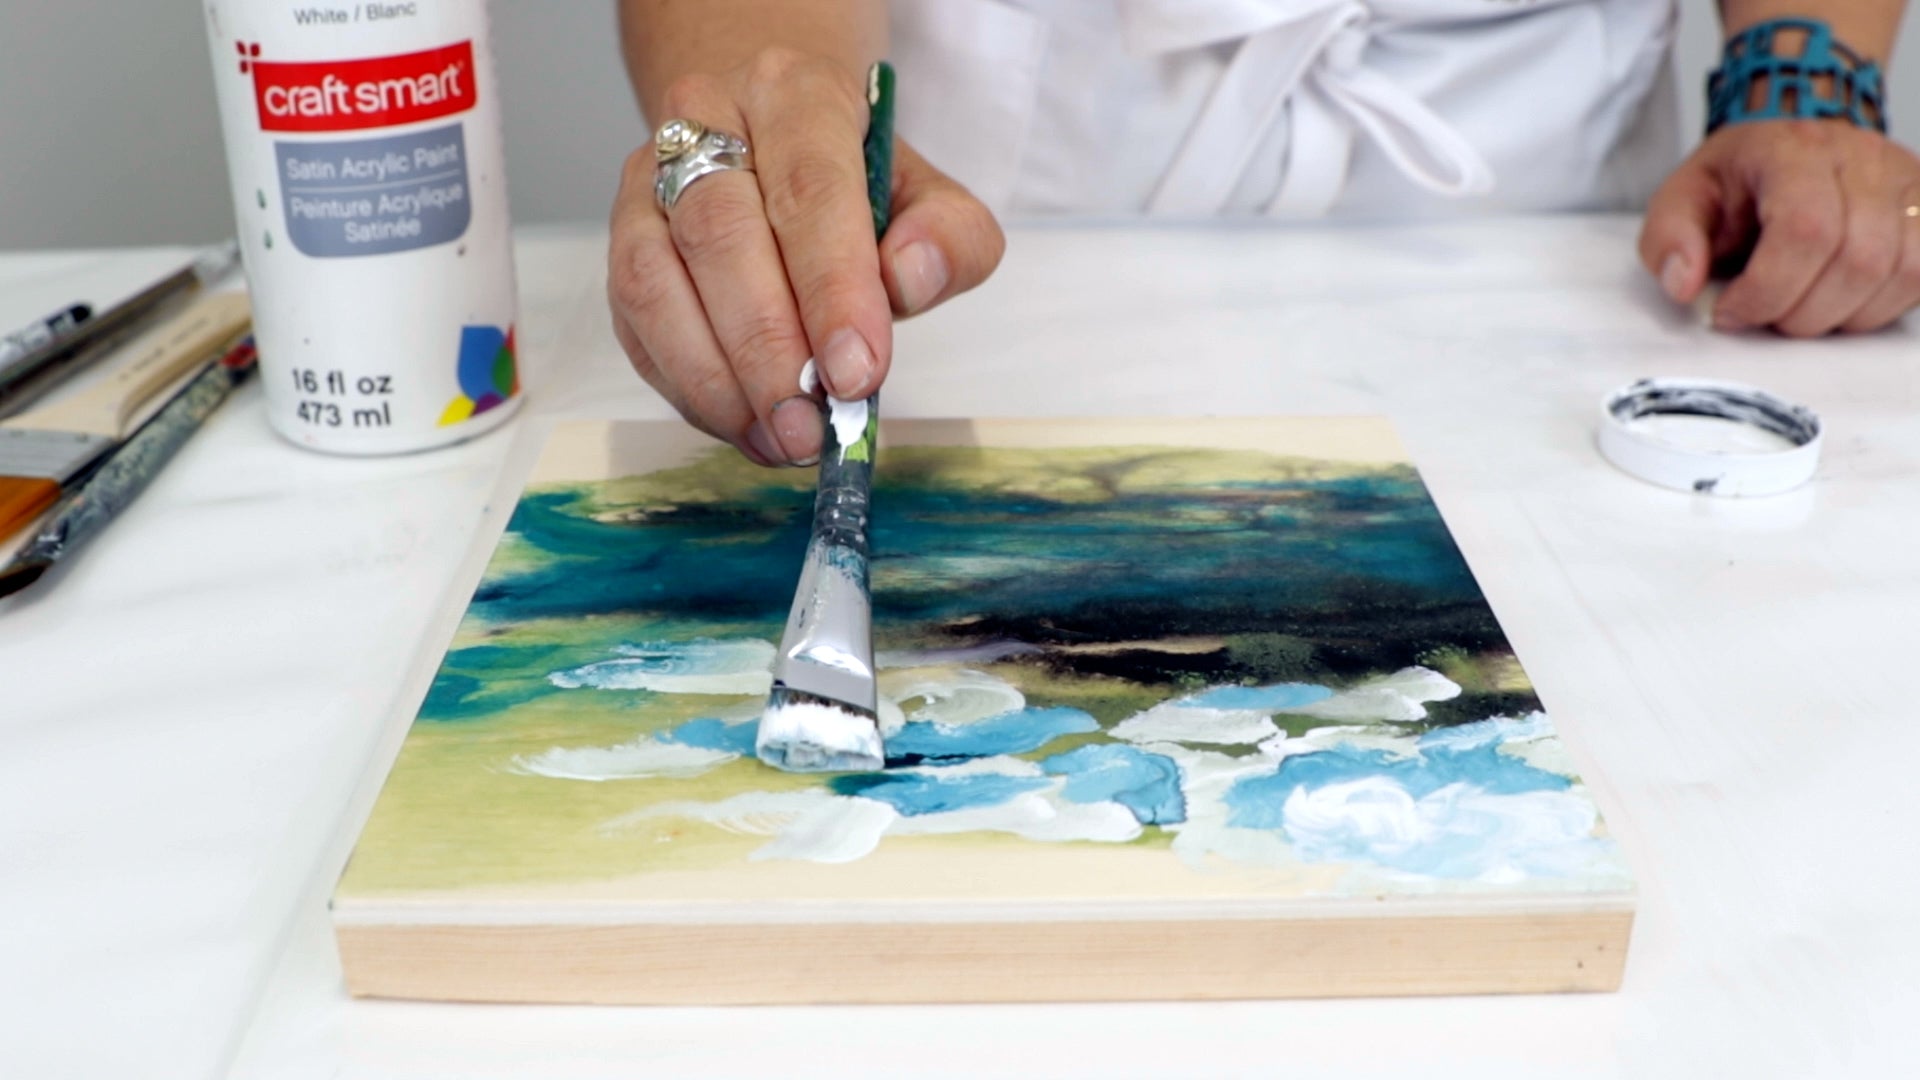 blend in blue dye with white acrylic paint to create clouds